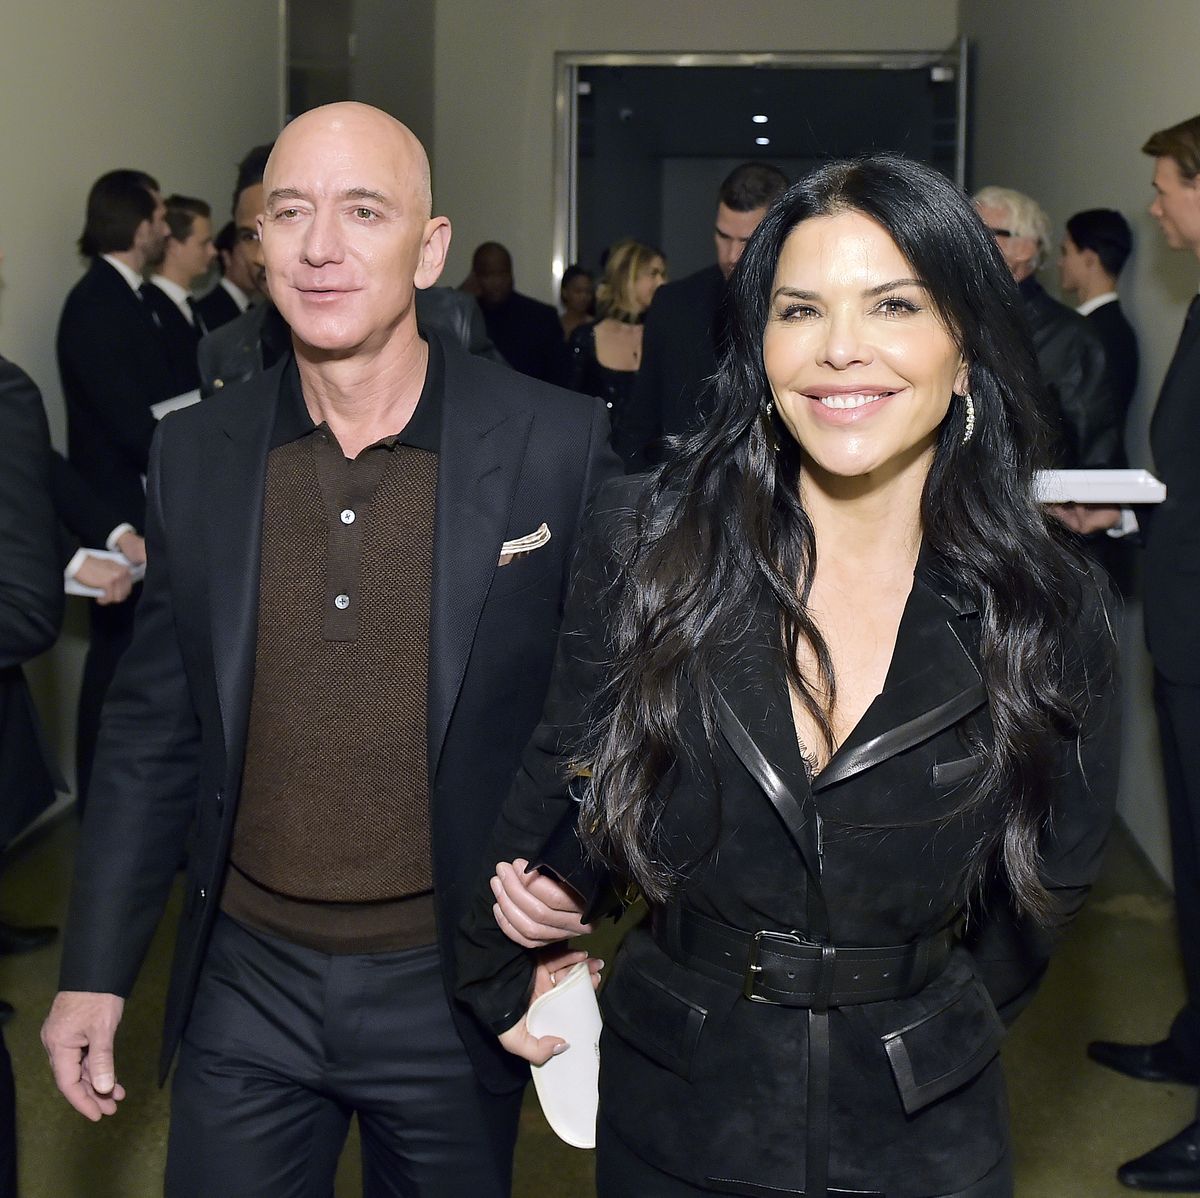 Jeff Bezos and Lauren Sanchez at the Tom Ford: Autumn/Winter 2020 Runway Show in Los Angeles.